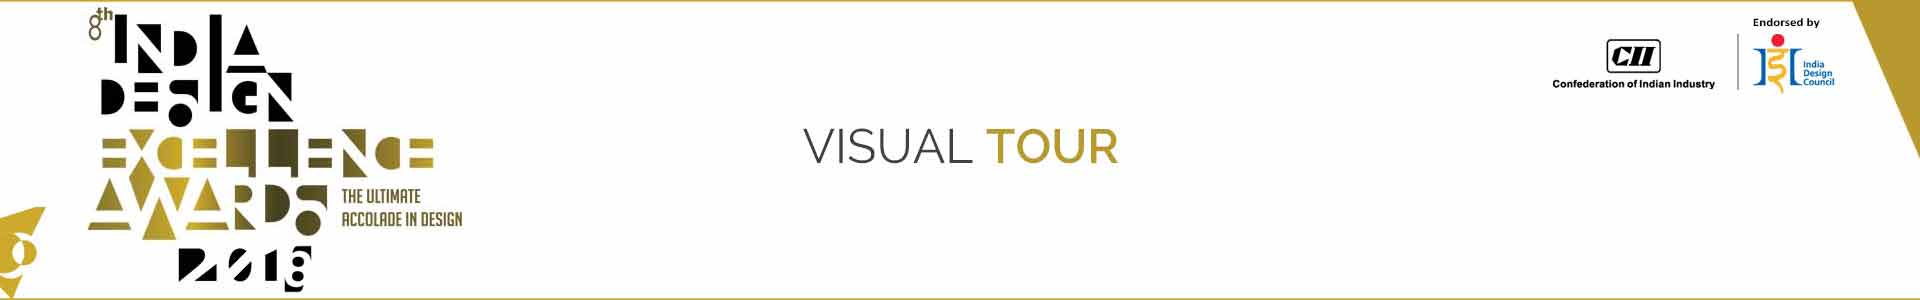 excellence-awards-visual-tour